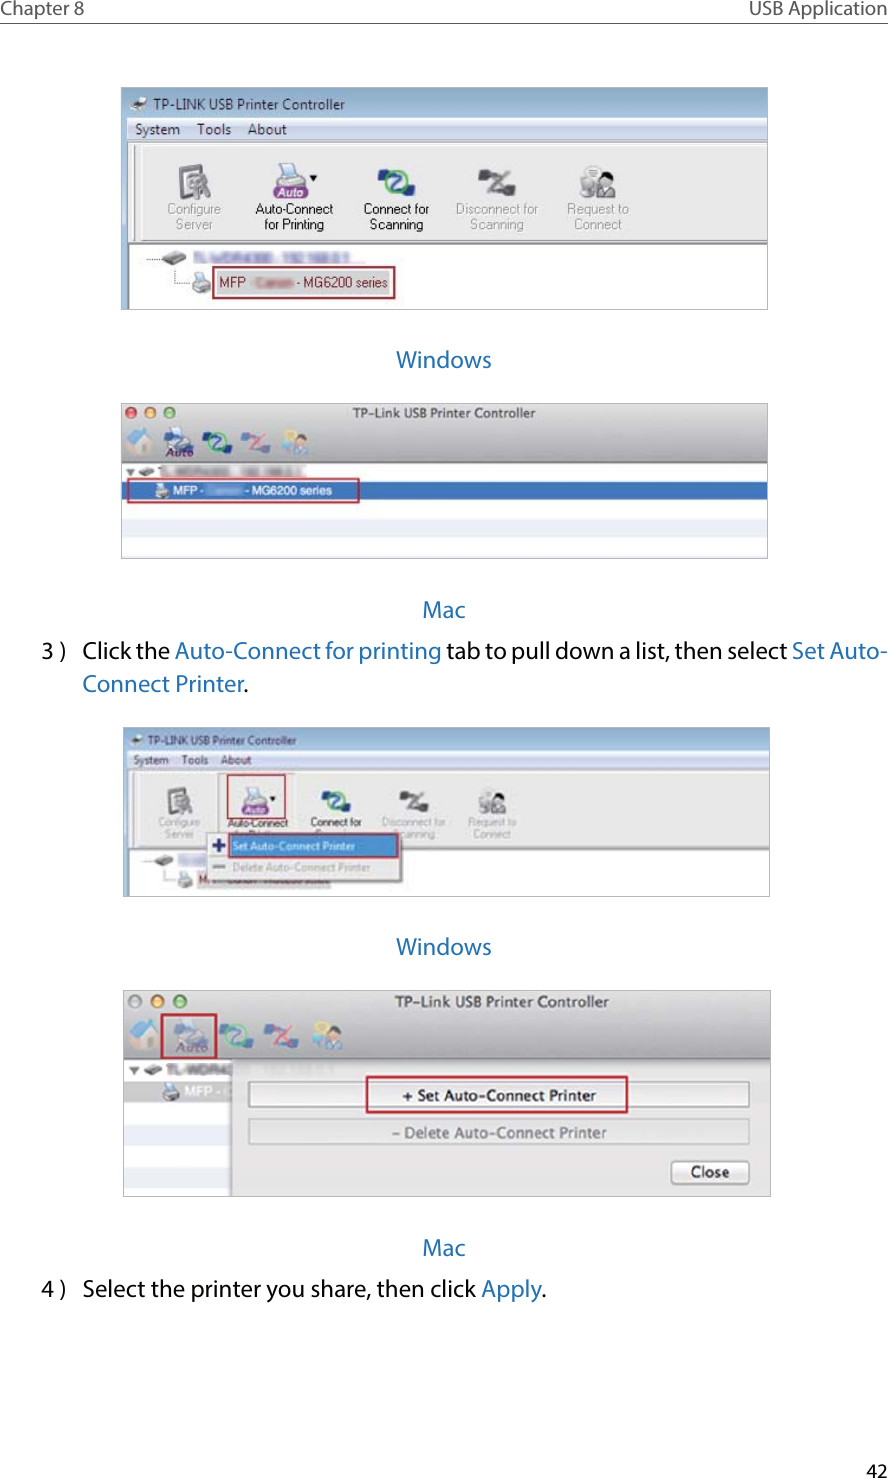 42Chapter 8 USB ApplicationWindowsMac3 )  Click the Auto-Connect for printing tab to pull down a list, then select Set Auto-Connect Printer. Windows Mac4 )  Select the printer you share, then click Apply.